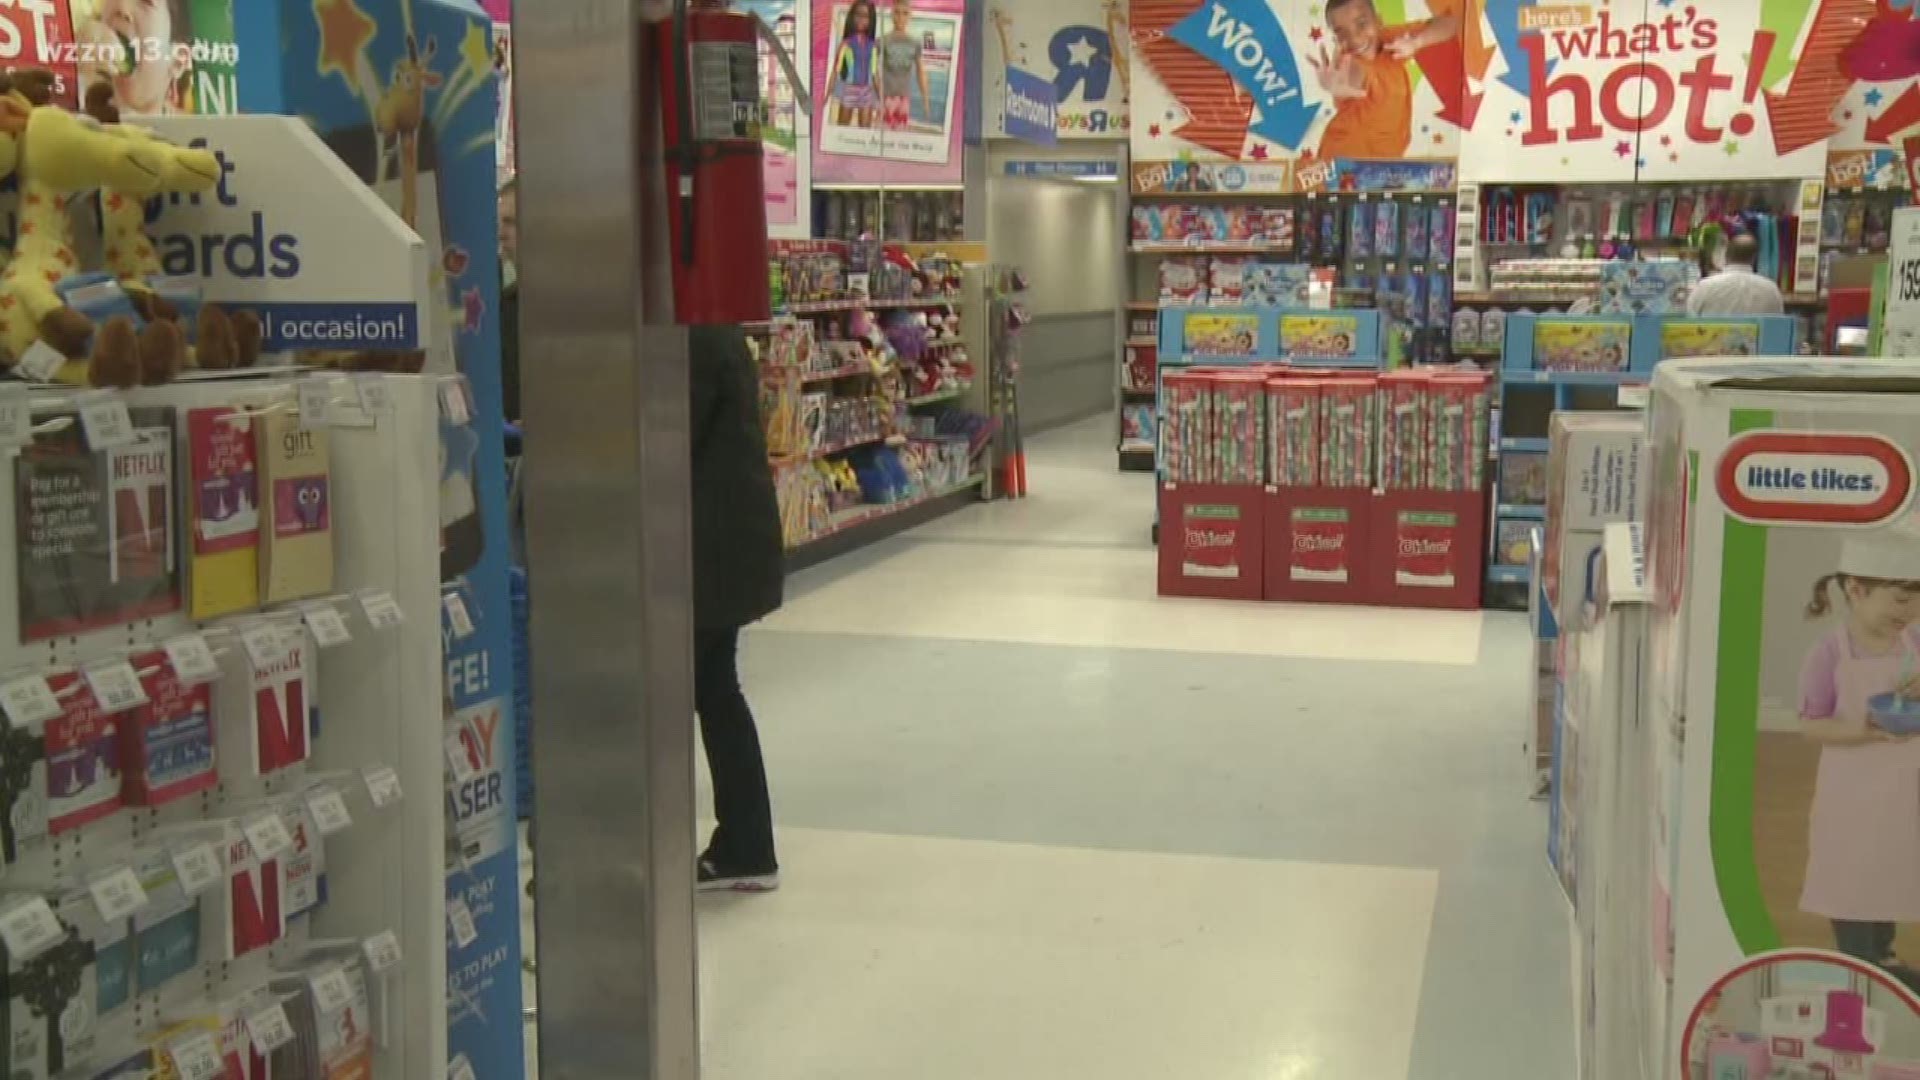 Grand Rapids man Toys for Tots shopping spree